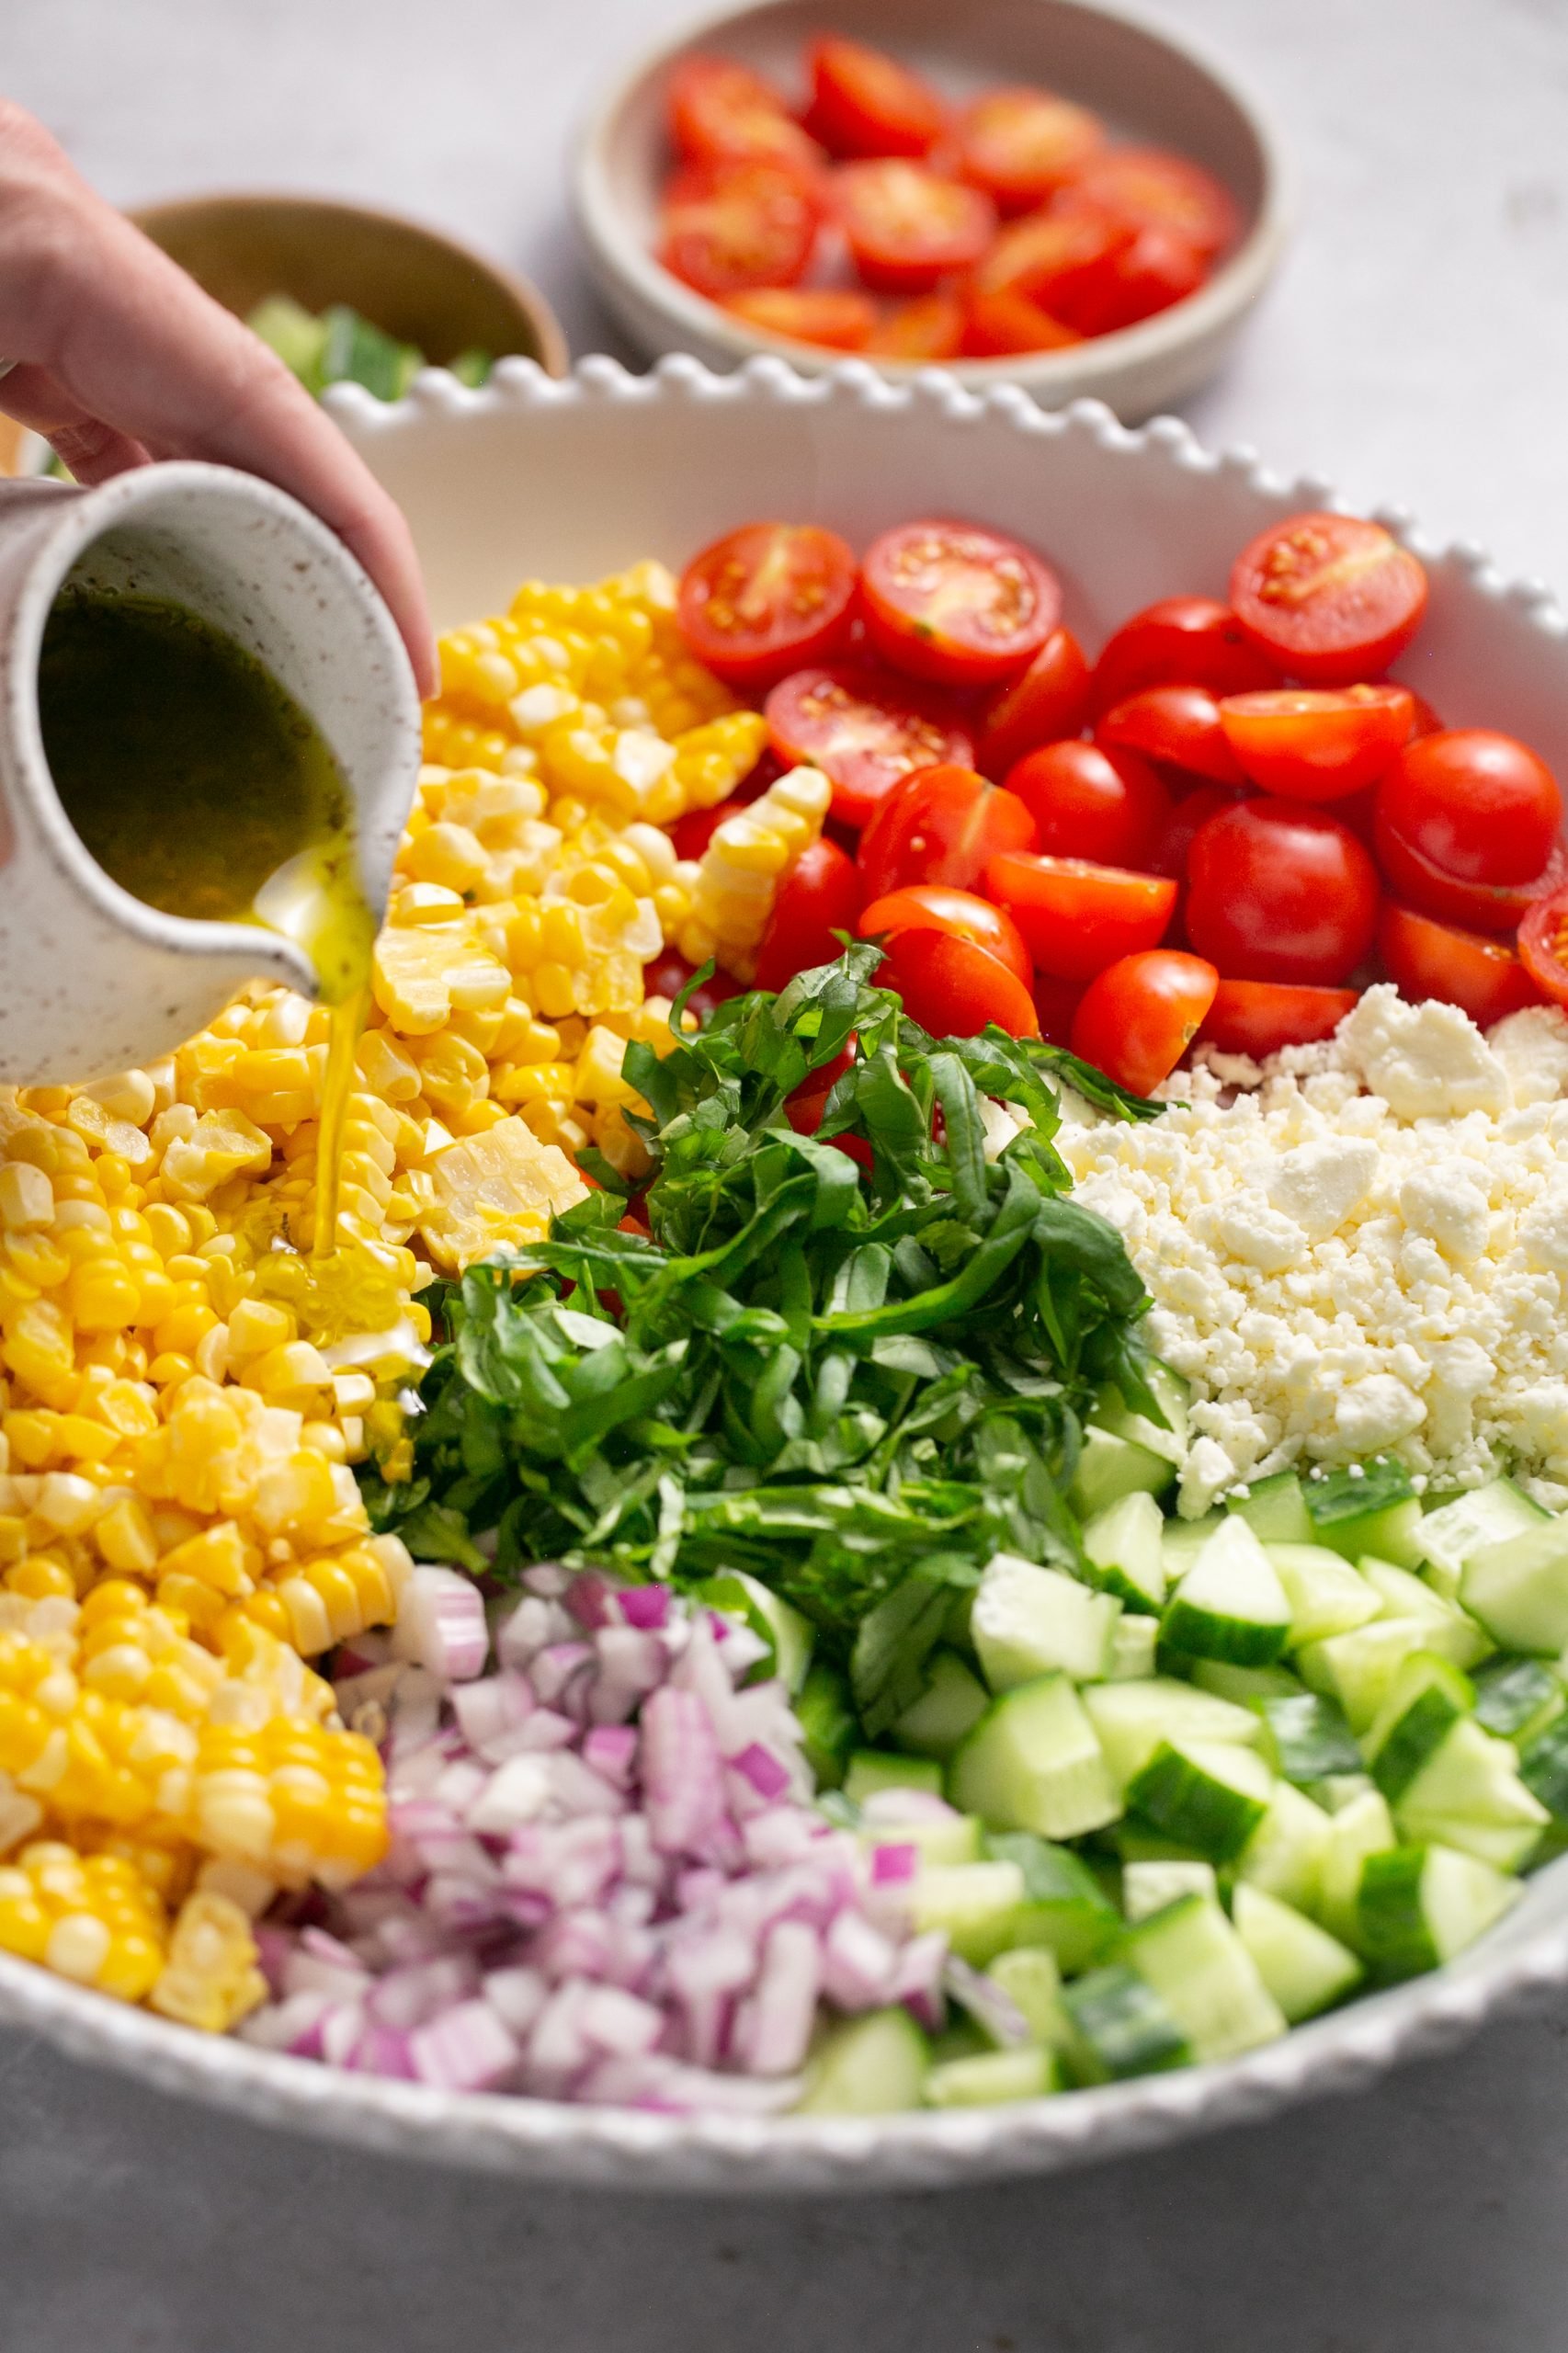 Hand pouring dressing over the other ingredients for the Quick & Fresh Corn Salad.